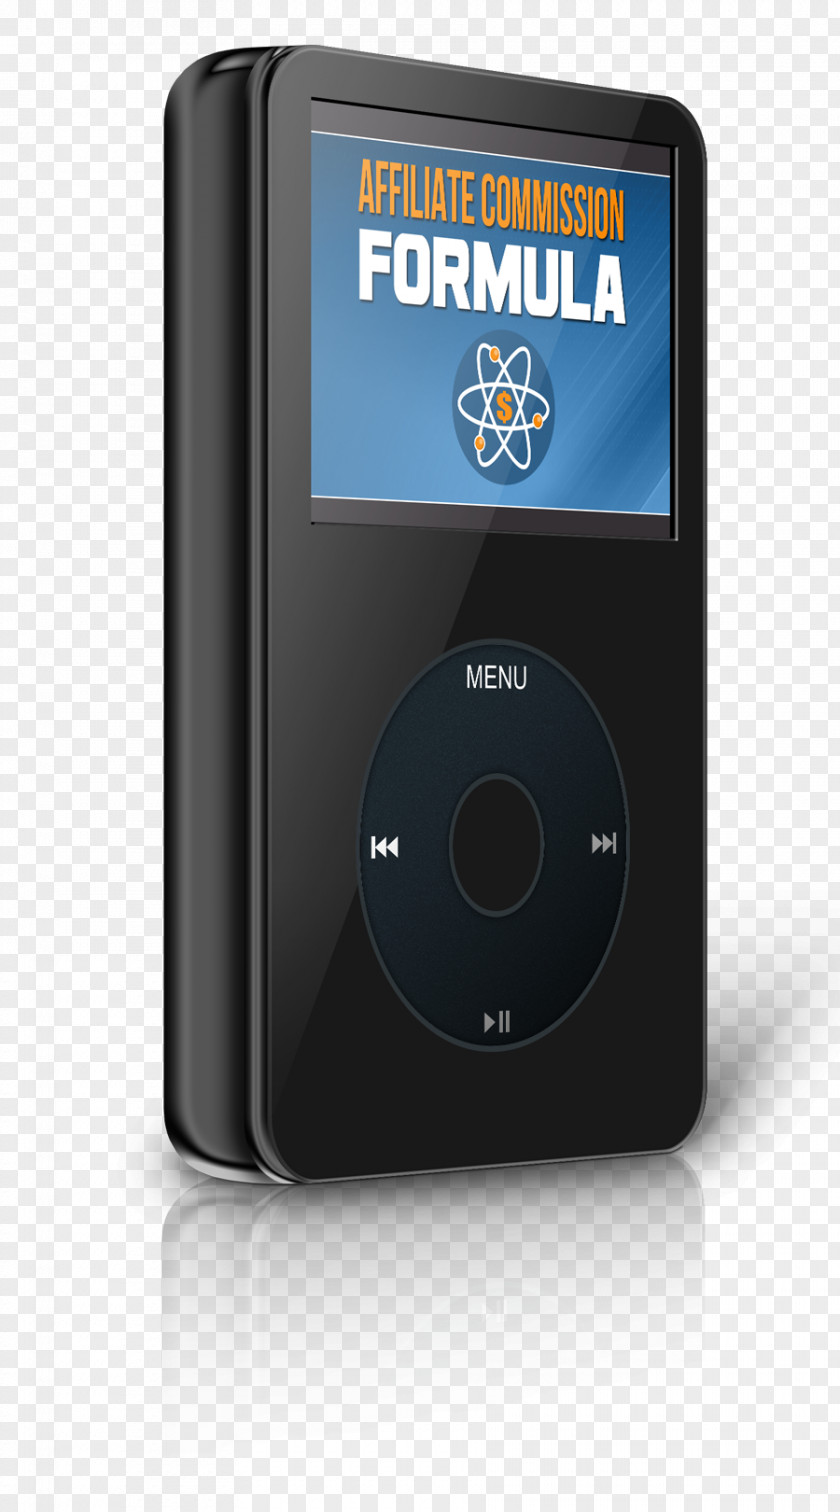 Design IPod Multimedia MP3 Player PNG